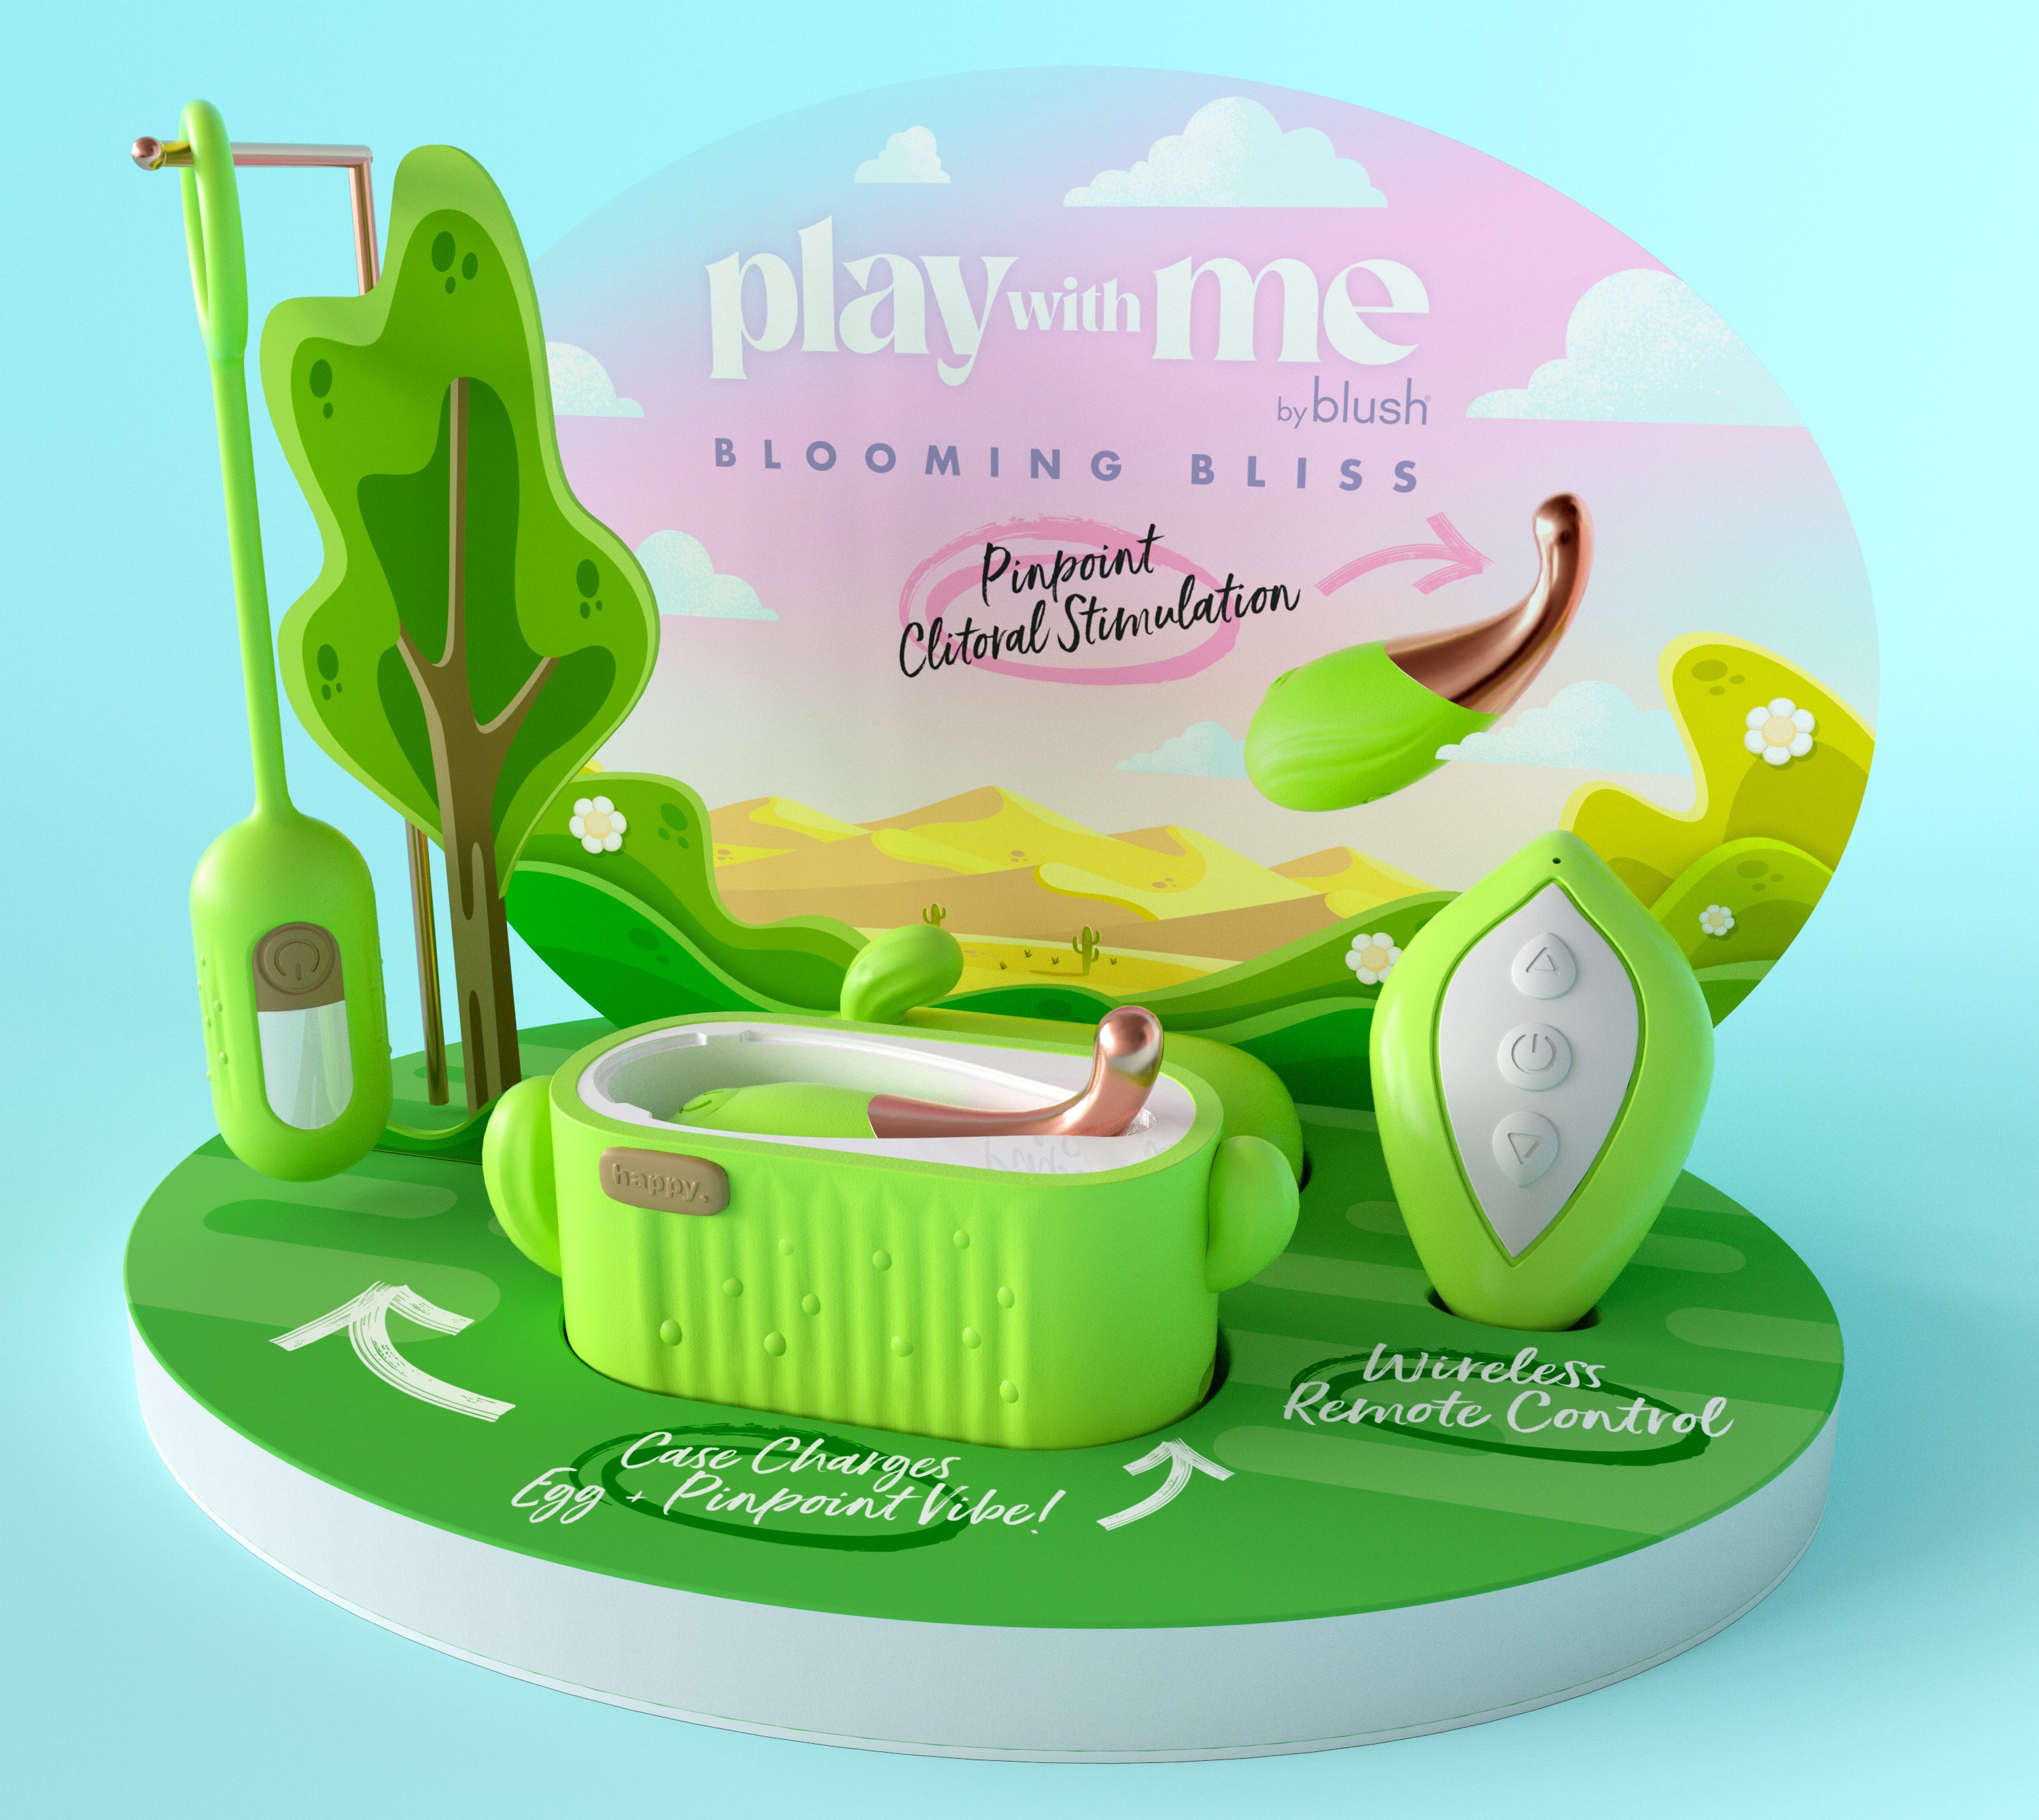 Play With Me Blooming Bliss Merchandising Kit - Green-0